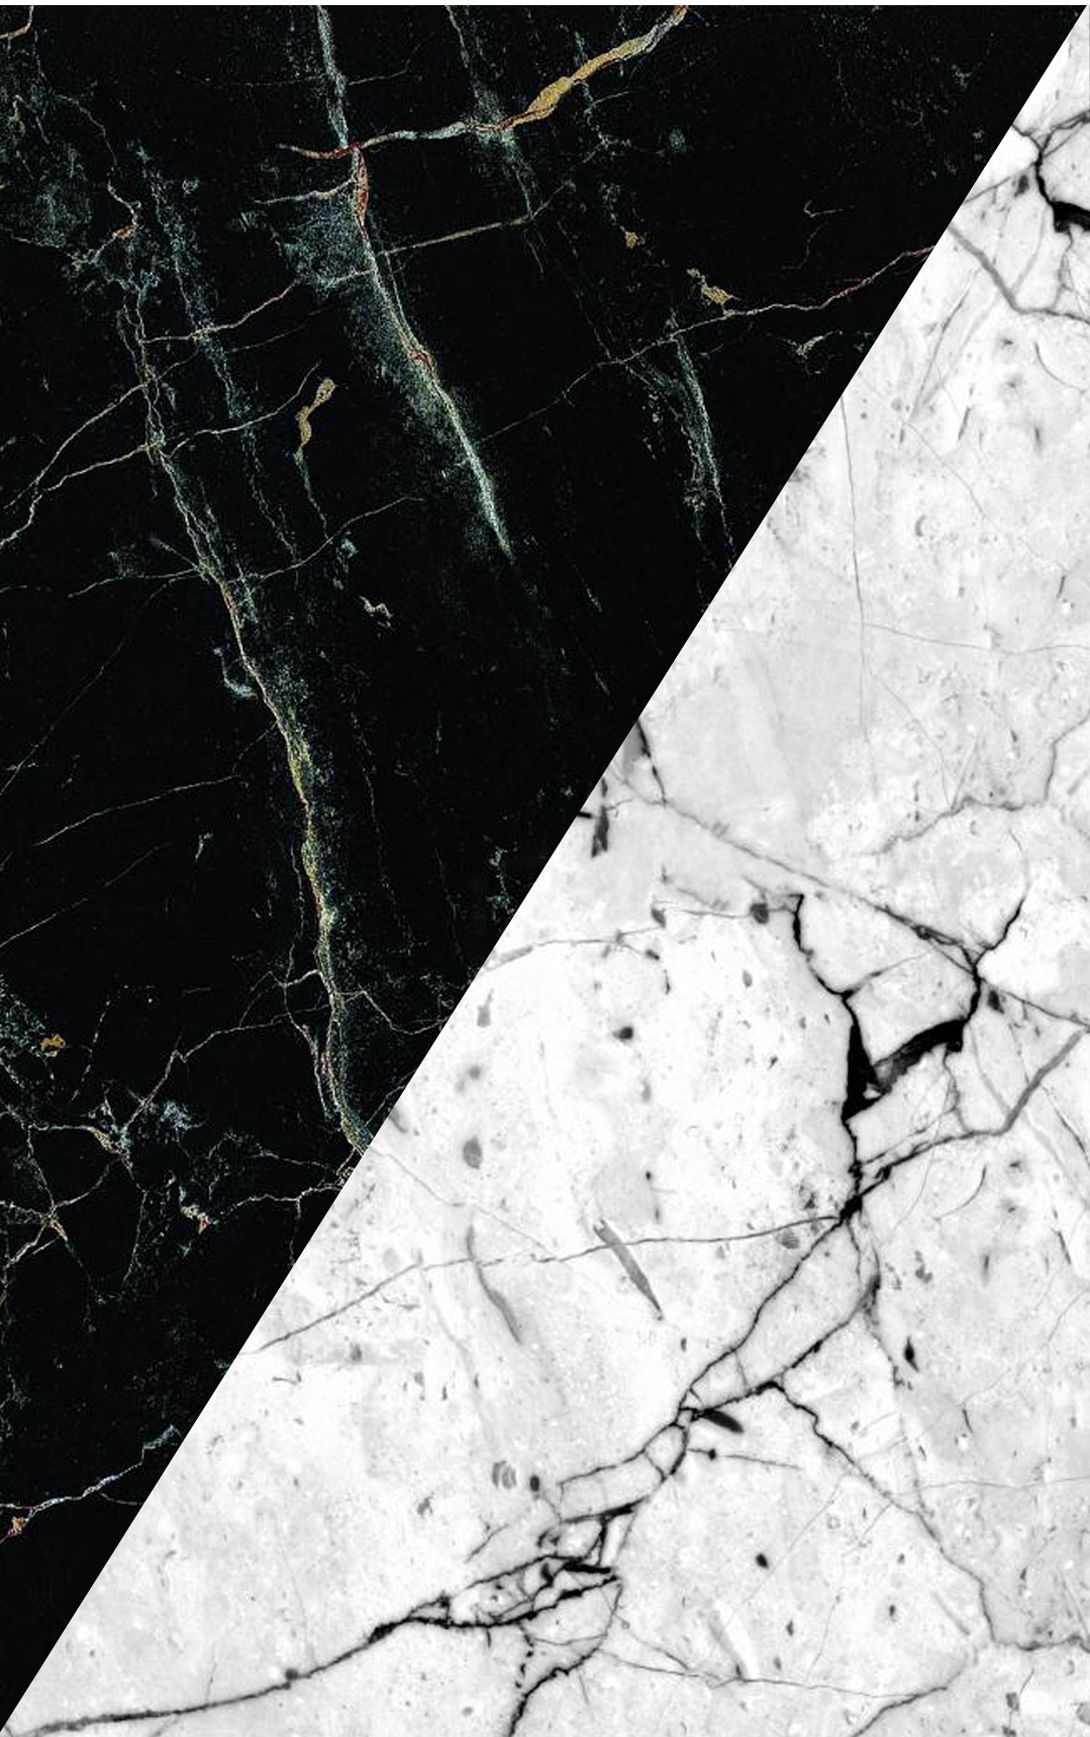 Marble Print iPhone Wallpaper On